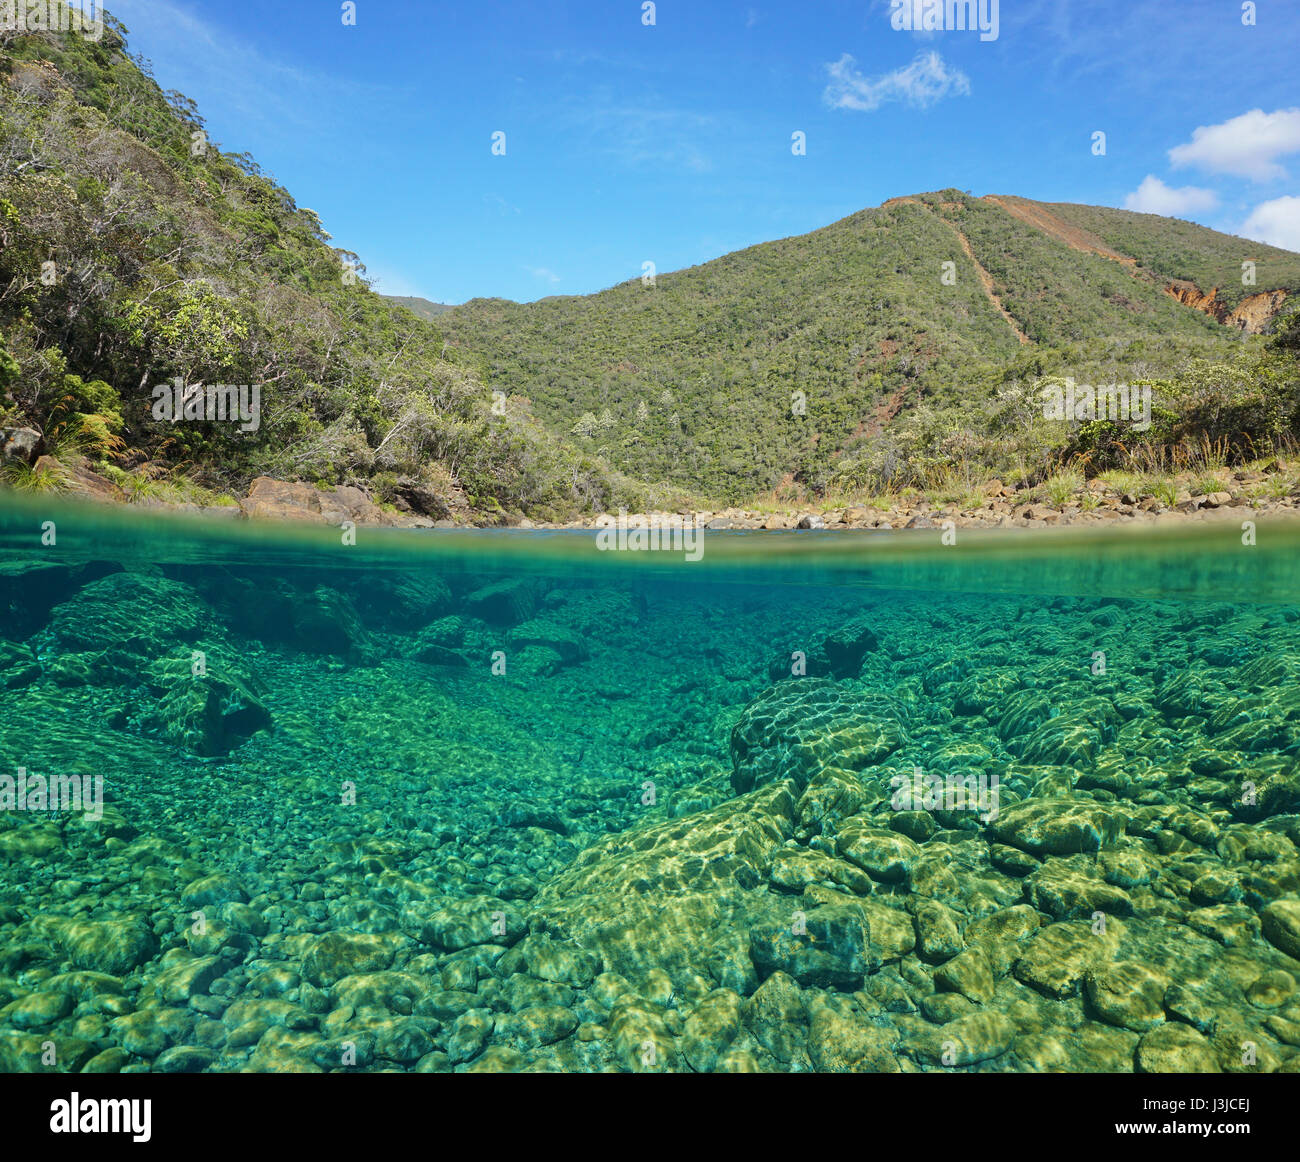 River landscape split view over under with a rocky riverbed underwater, Dumbea, Grande-Terre, New Caledonia, Oceania Stock Photo